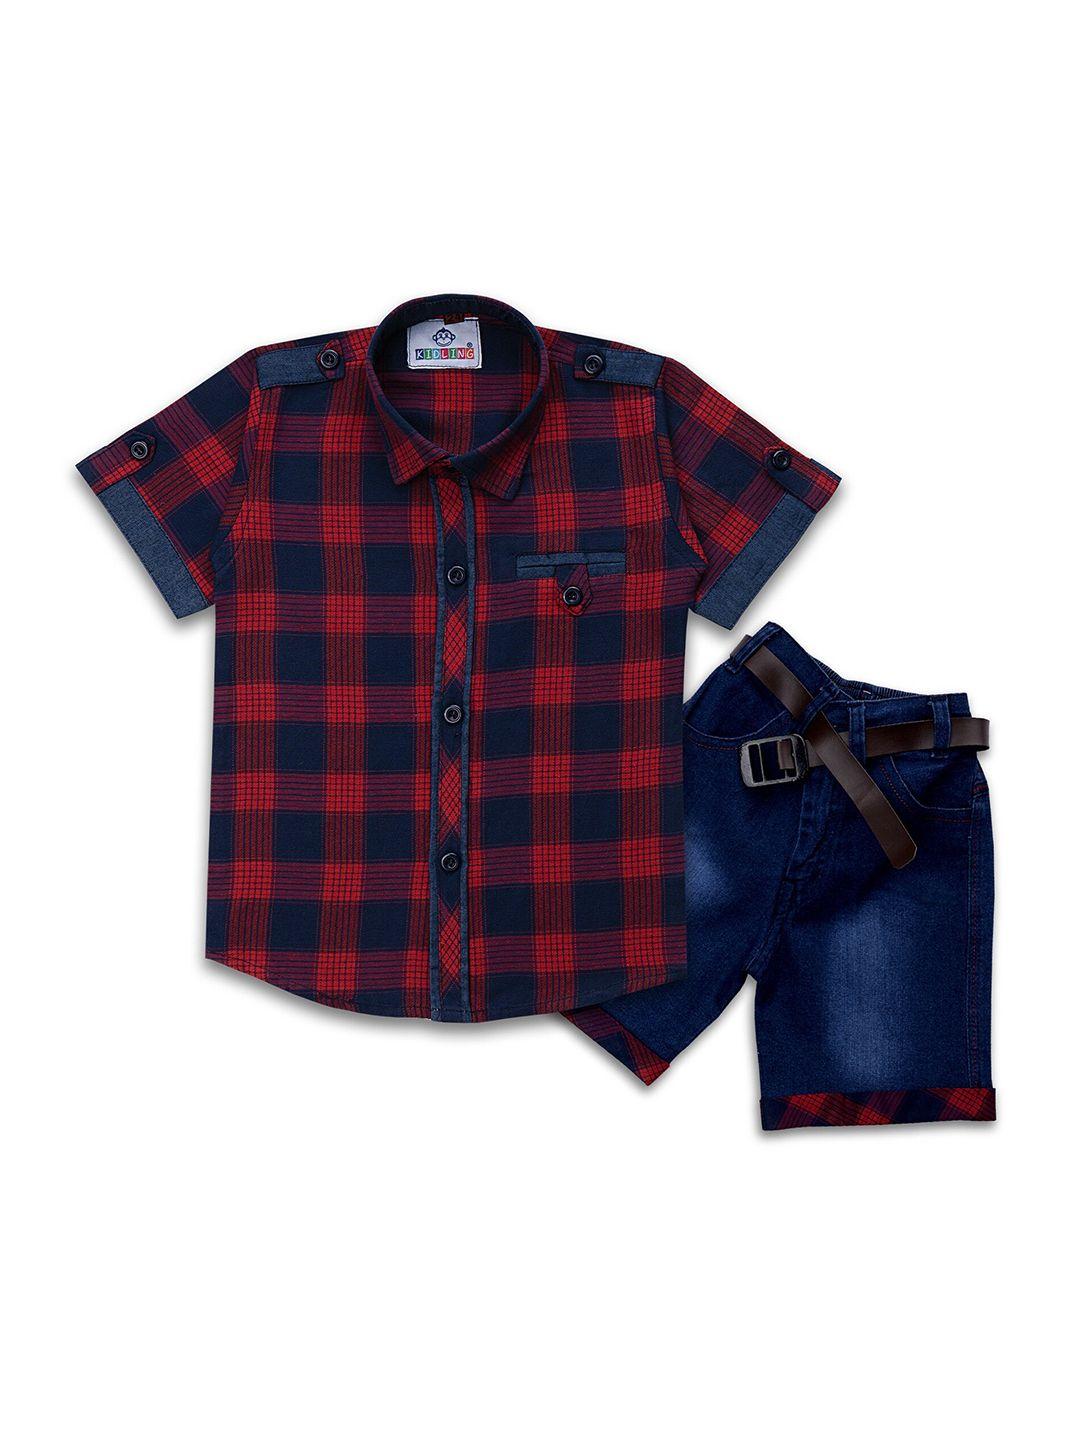 kidling boys red & blue checked shirt with denim shorts